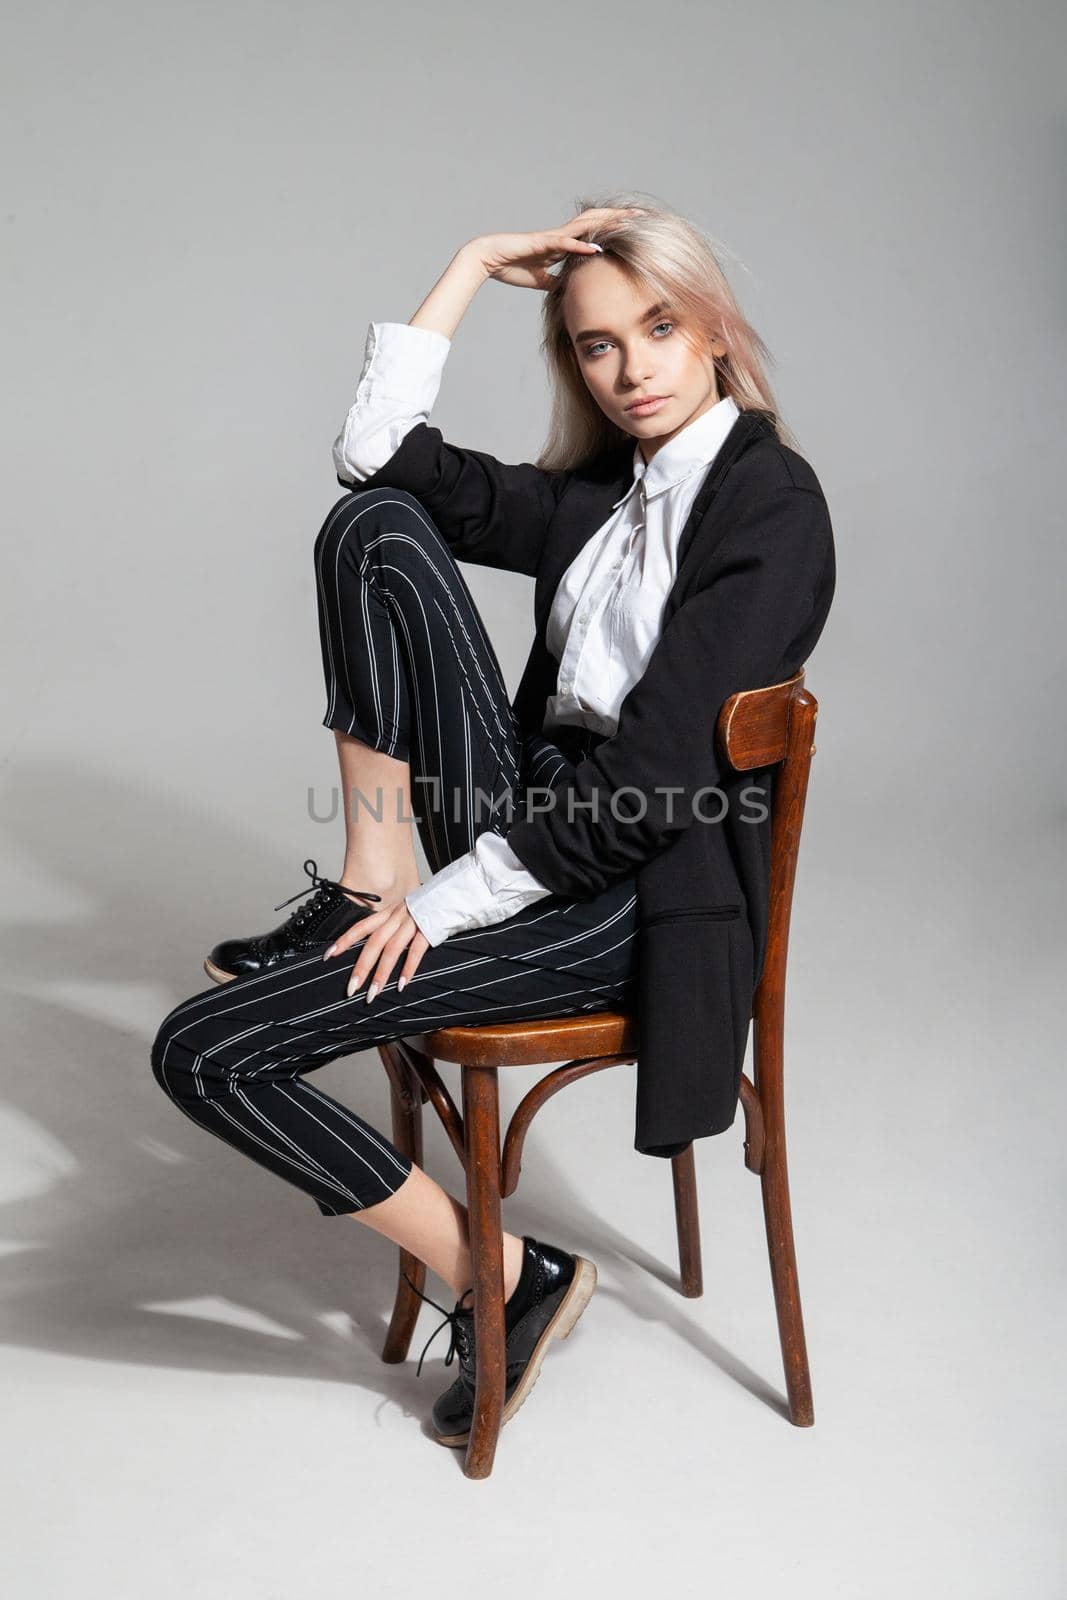 Woman in stylish outfit sitting on chair by Julenochek